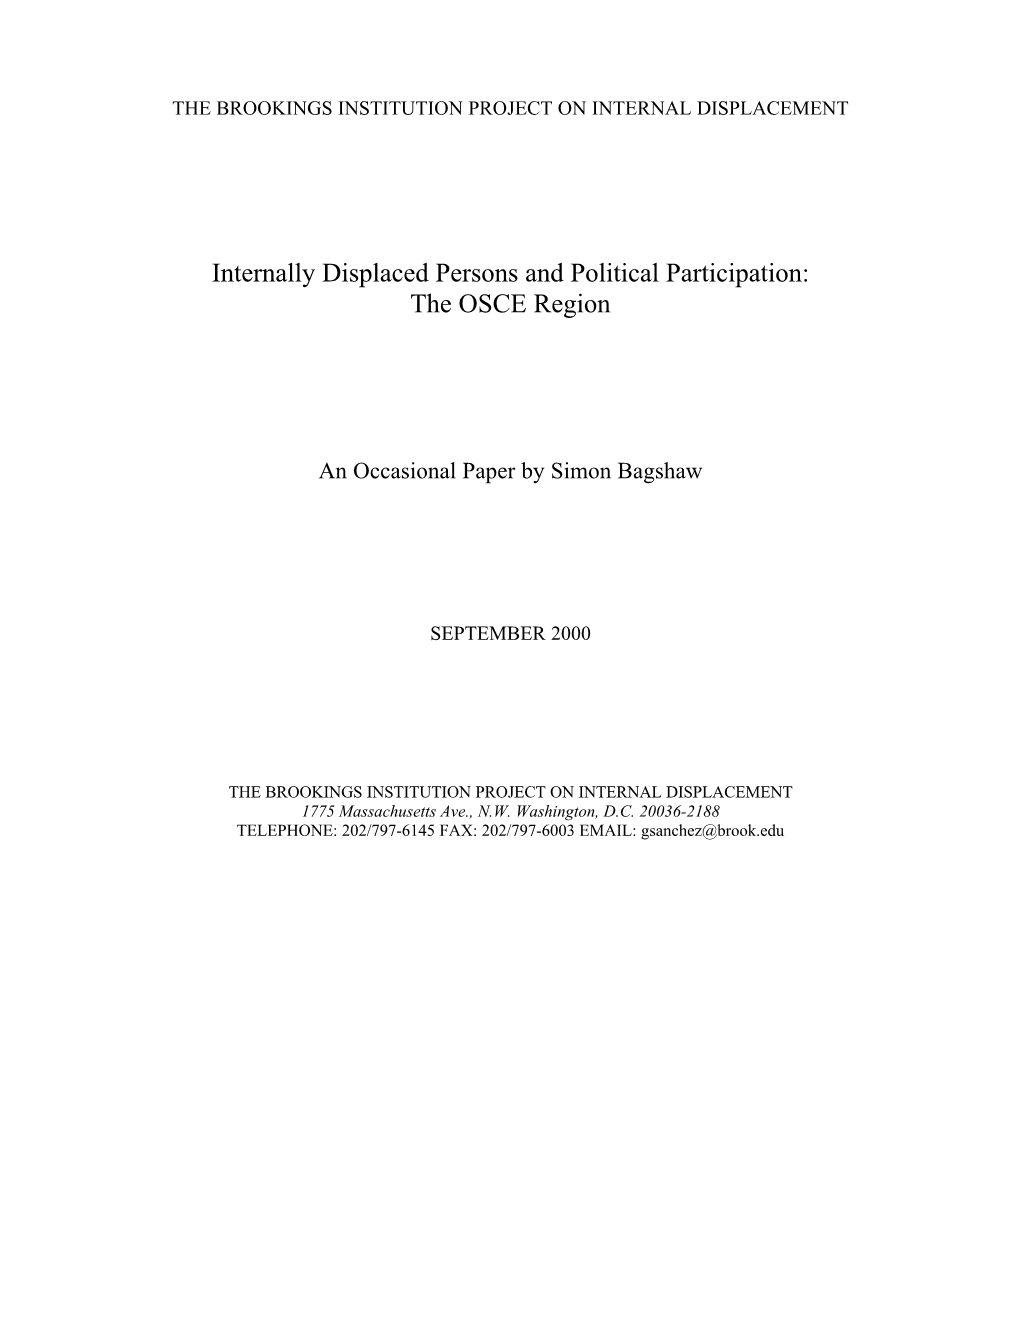 Internally Displaced Persons and Political Participation: the OSCE Region